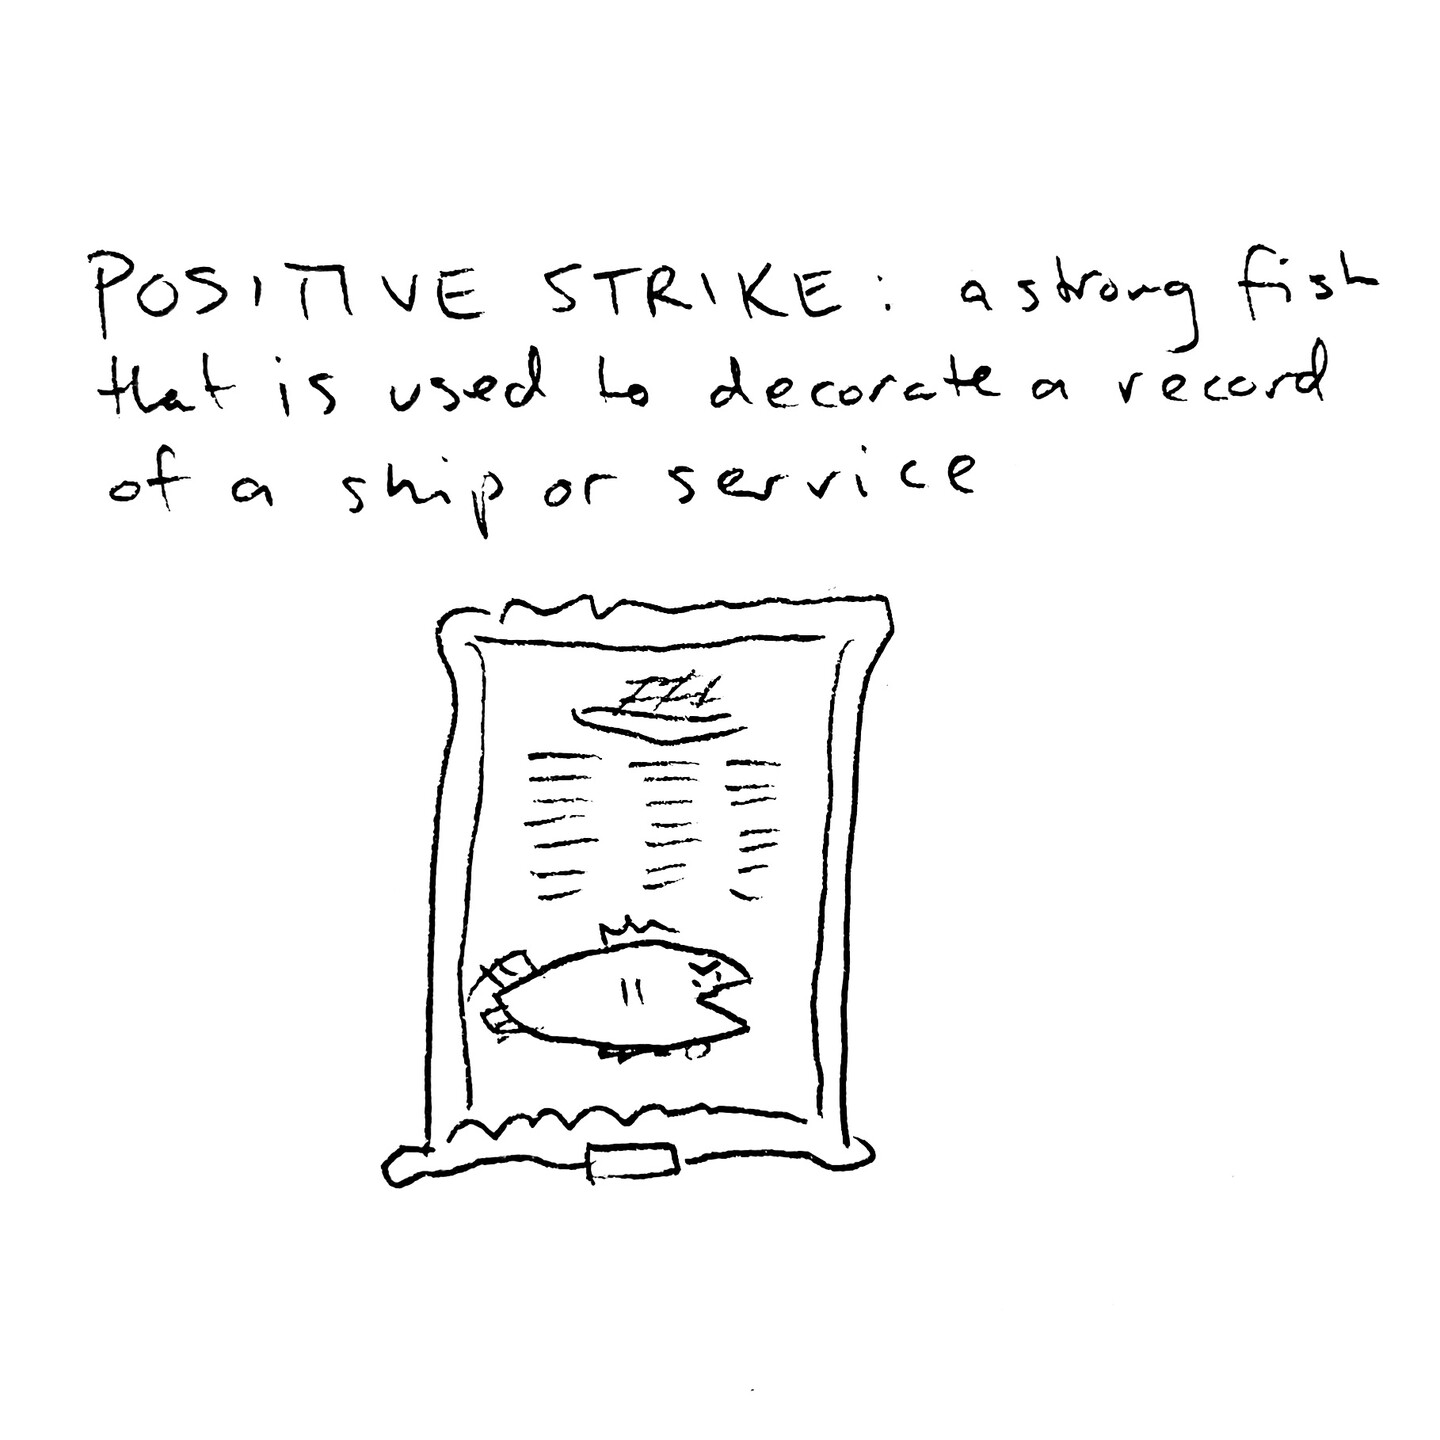 POSITIVE STRIKE: a strong fish that is used to decorate a record of a ship or service. The drawing depicts a framed certificate with a sailing ship at the top and a large fish at the bottom.